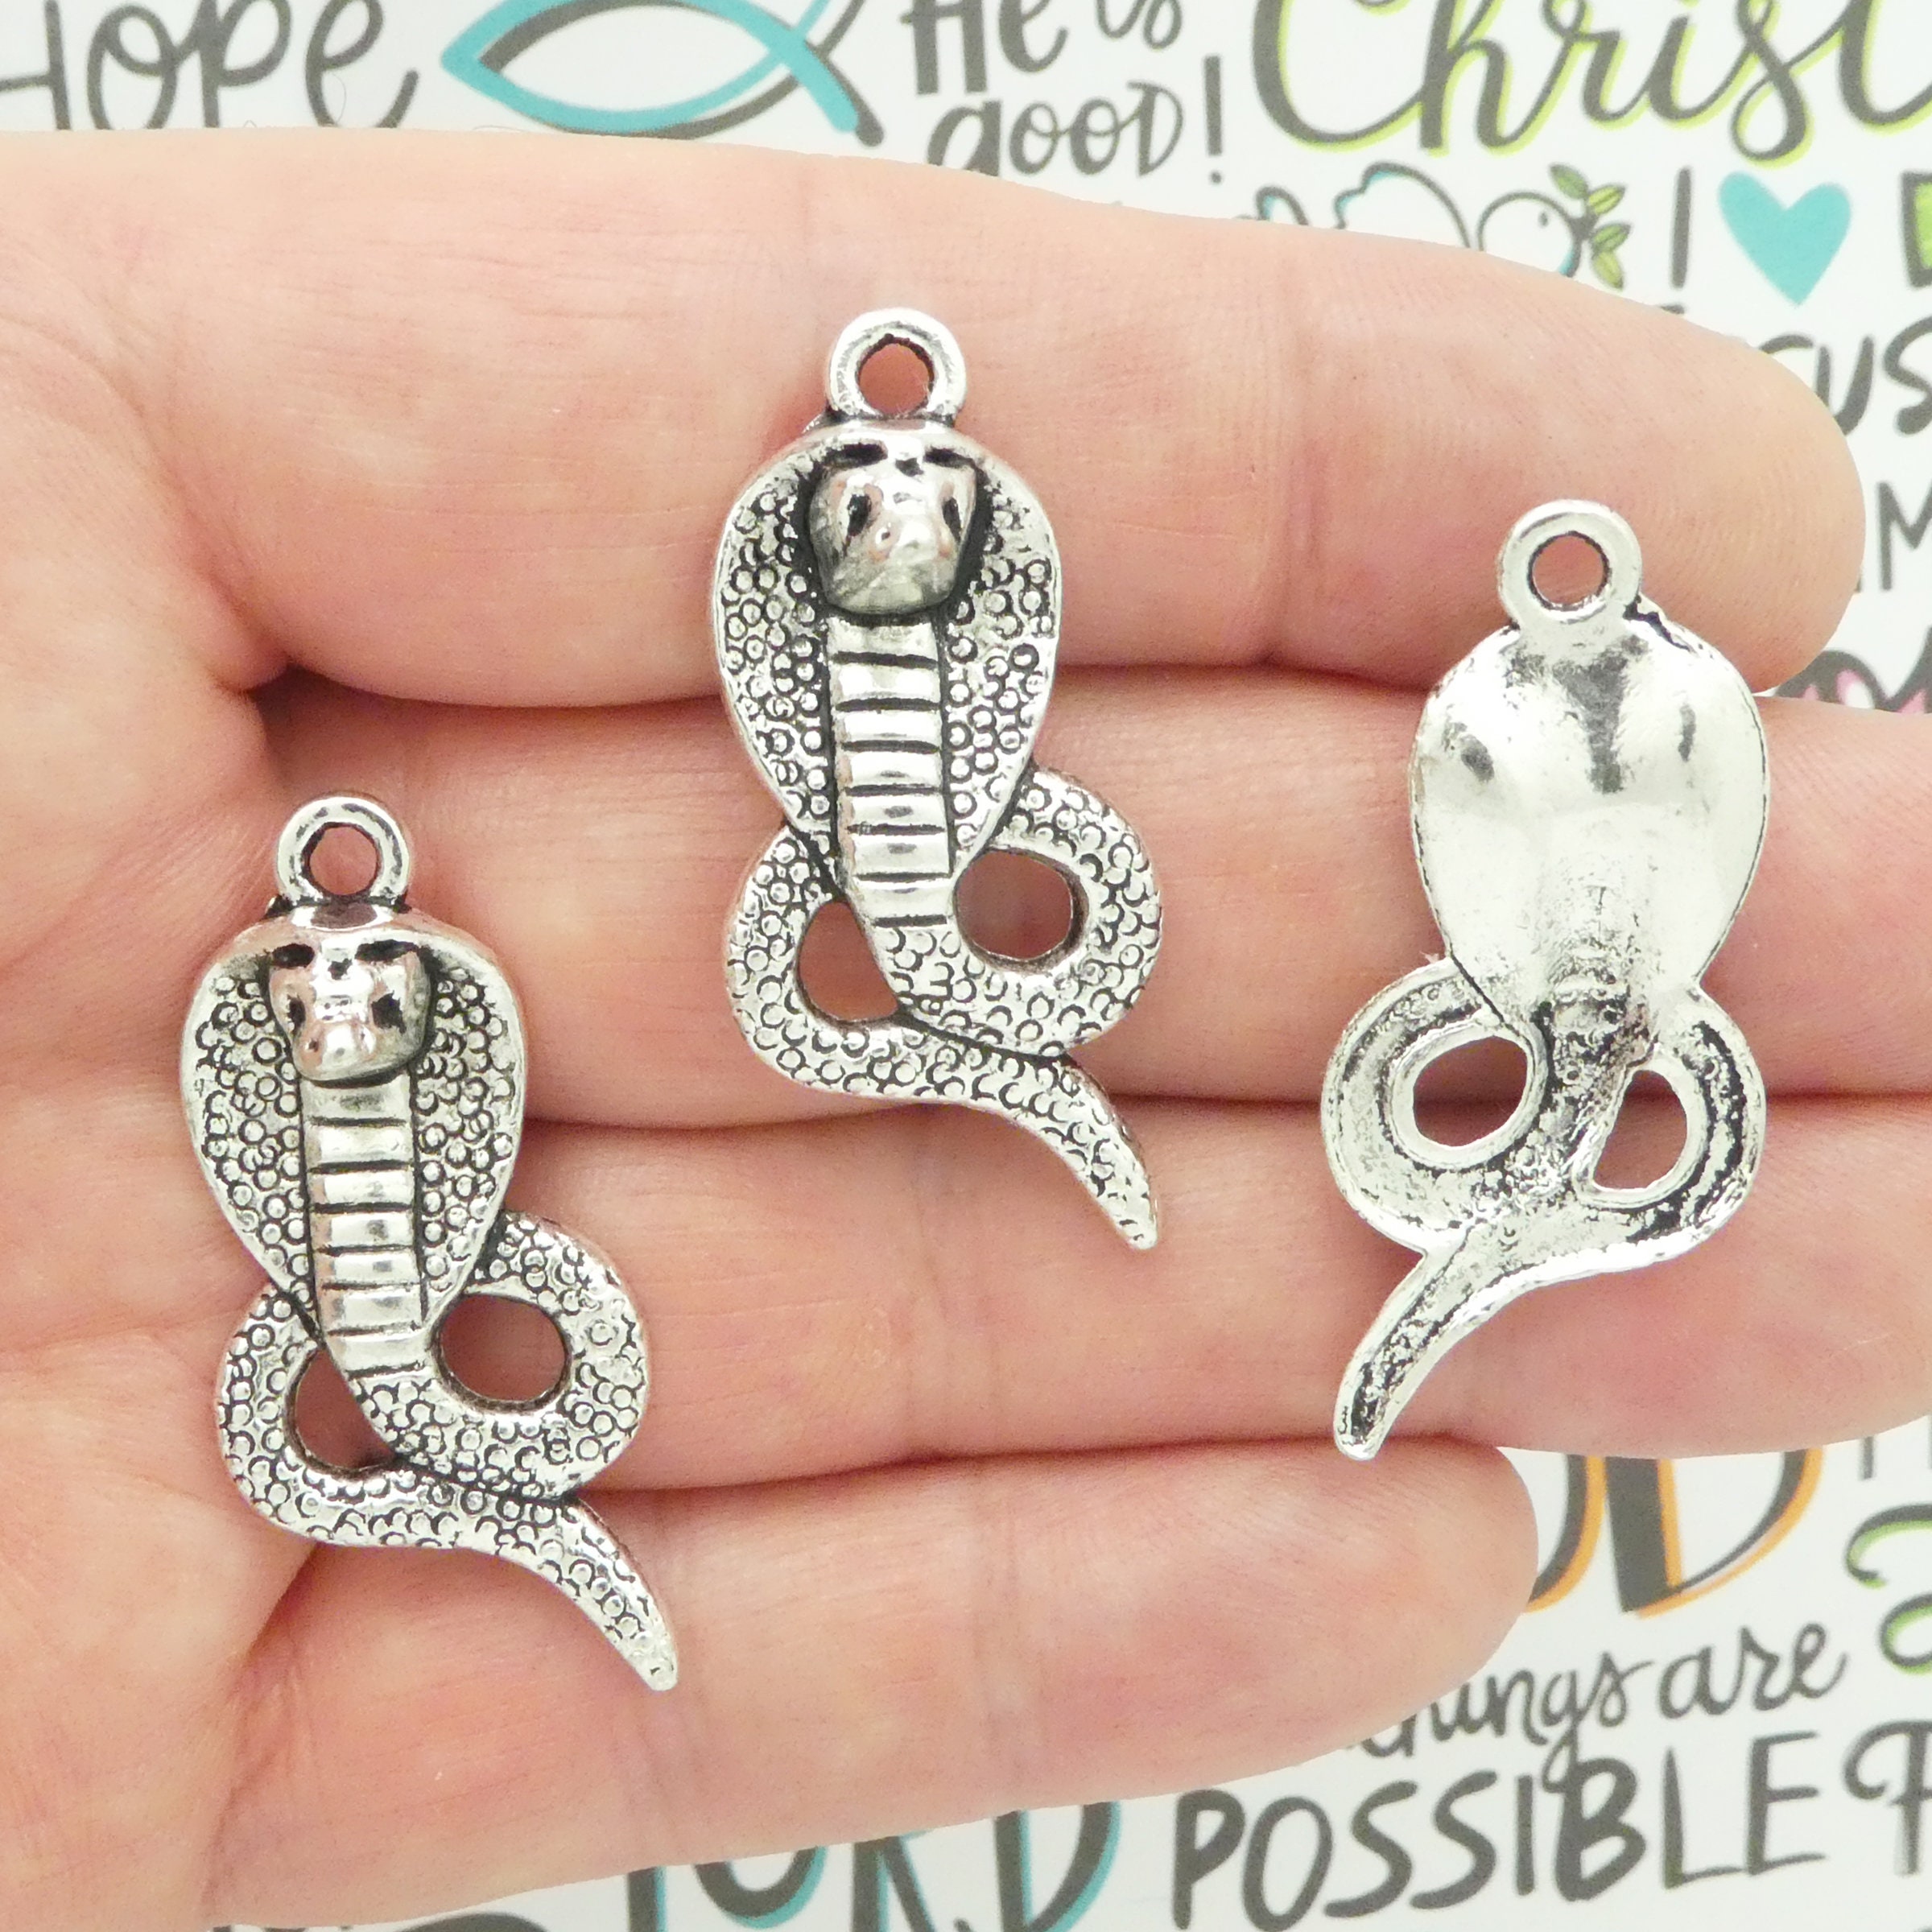 6pcs Stainless Steel Snake Charm, Steel Charms, Snake Pendant, Earring  Charms, Serpent Charm, Laser Cut Jewelry Making Supplies STL-3582